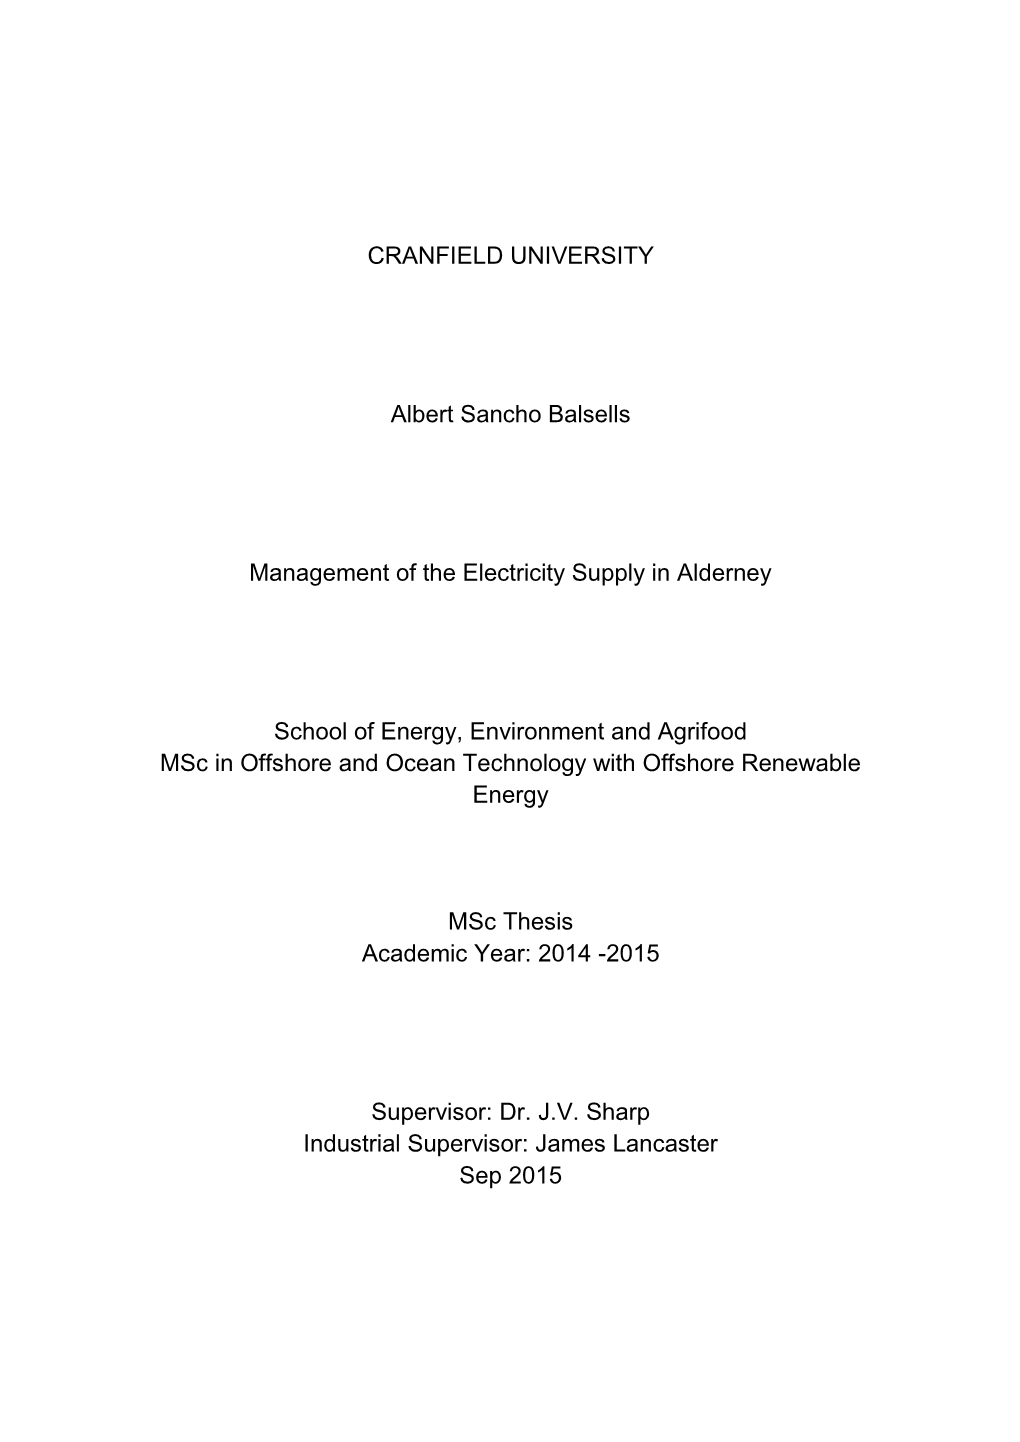 CRANFIELD UNIVERSITY Albert Sancho Balsells Management of the Electricity Supply in Alderney School of Energy, Environment and A